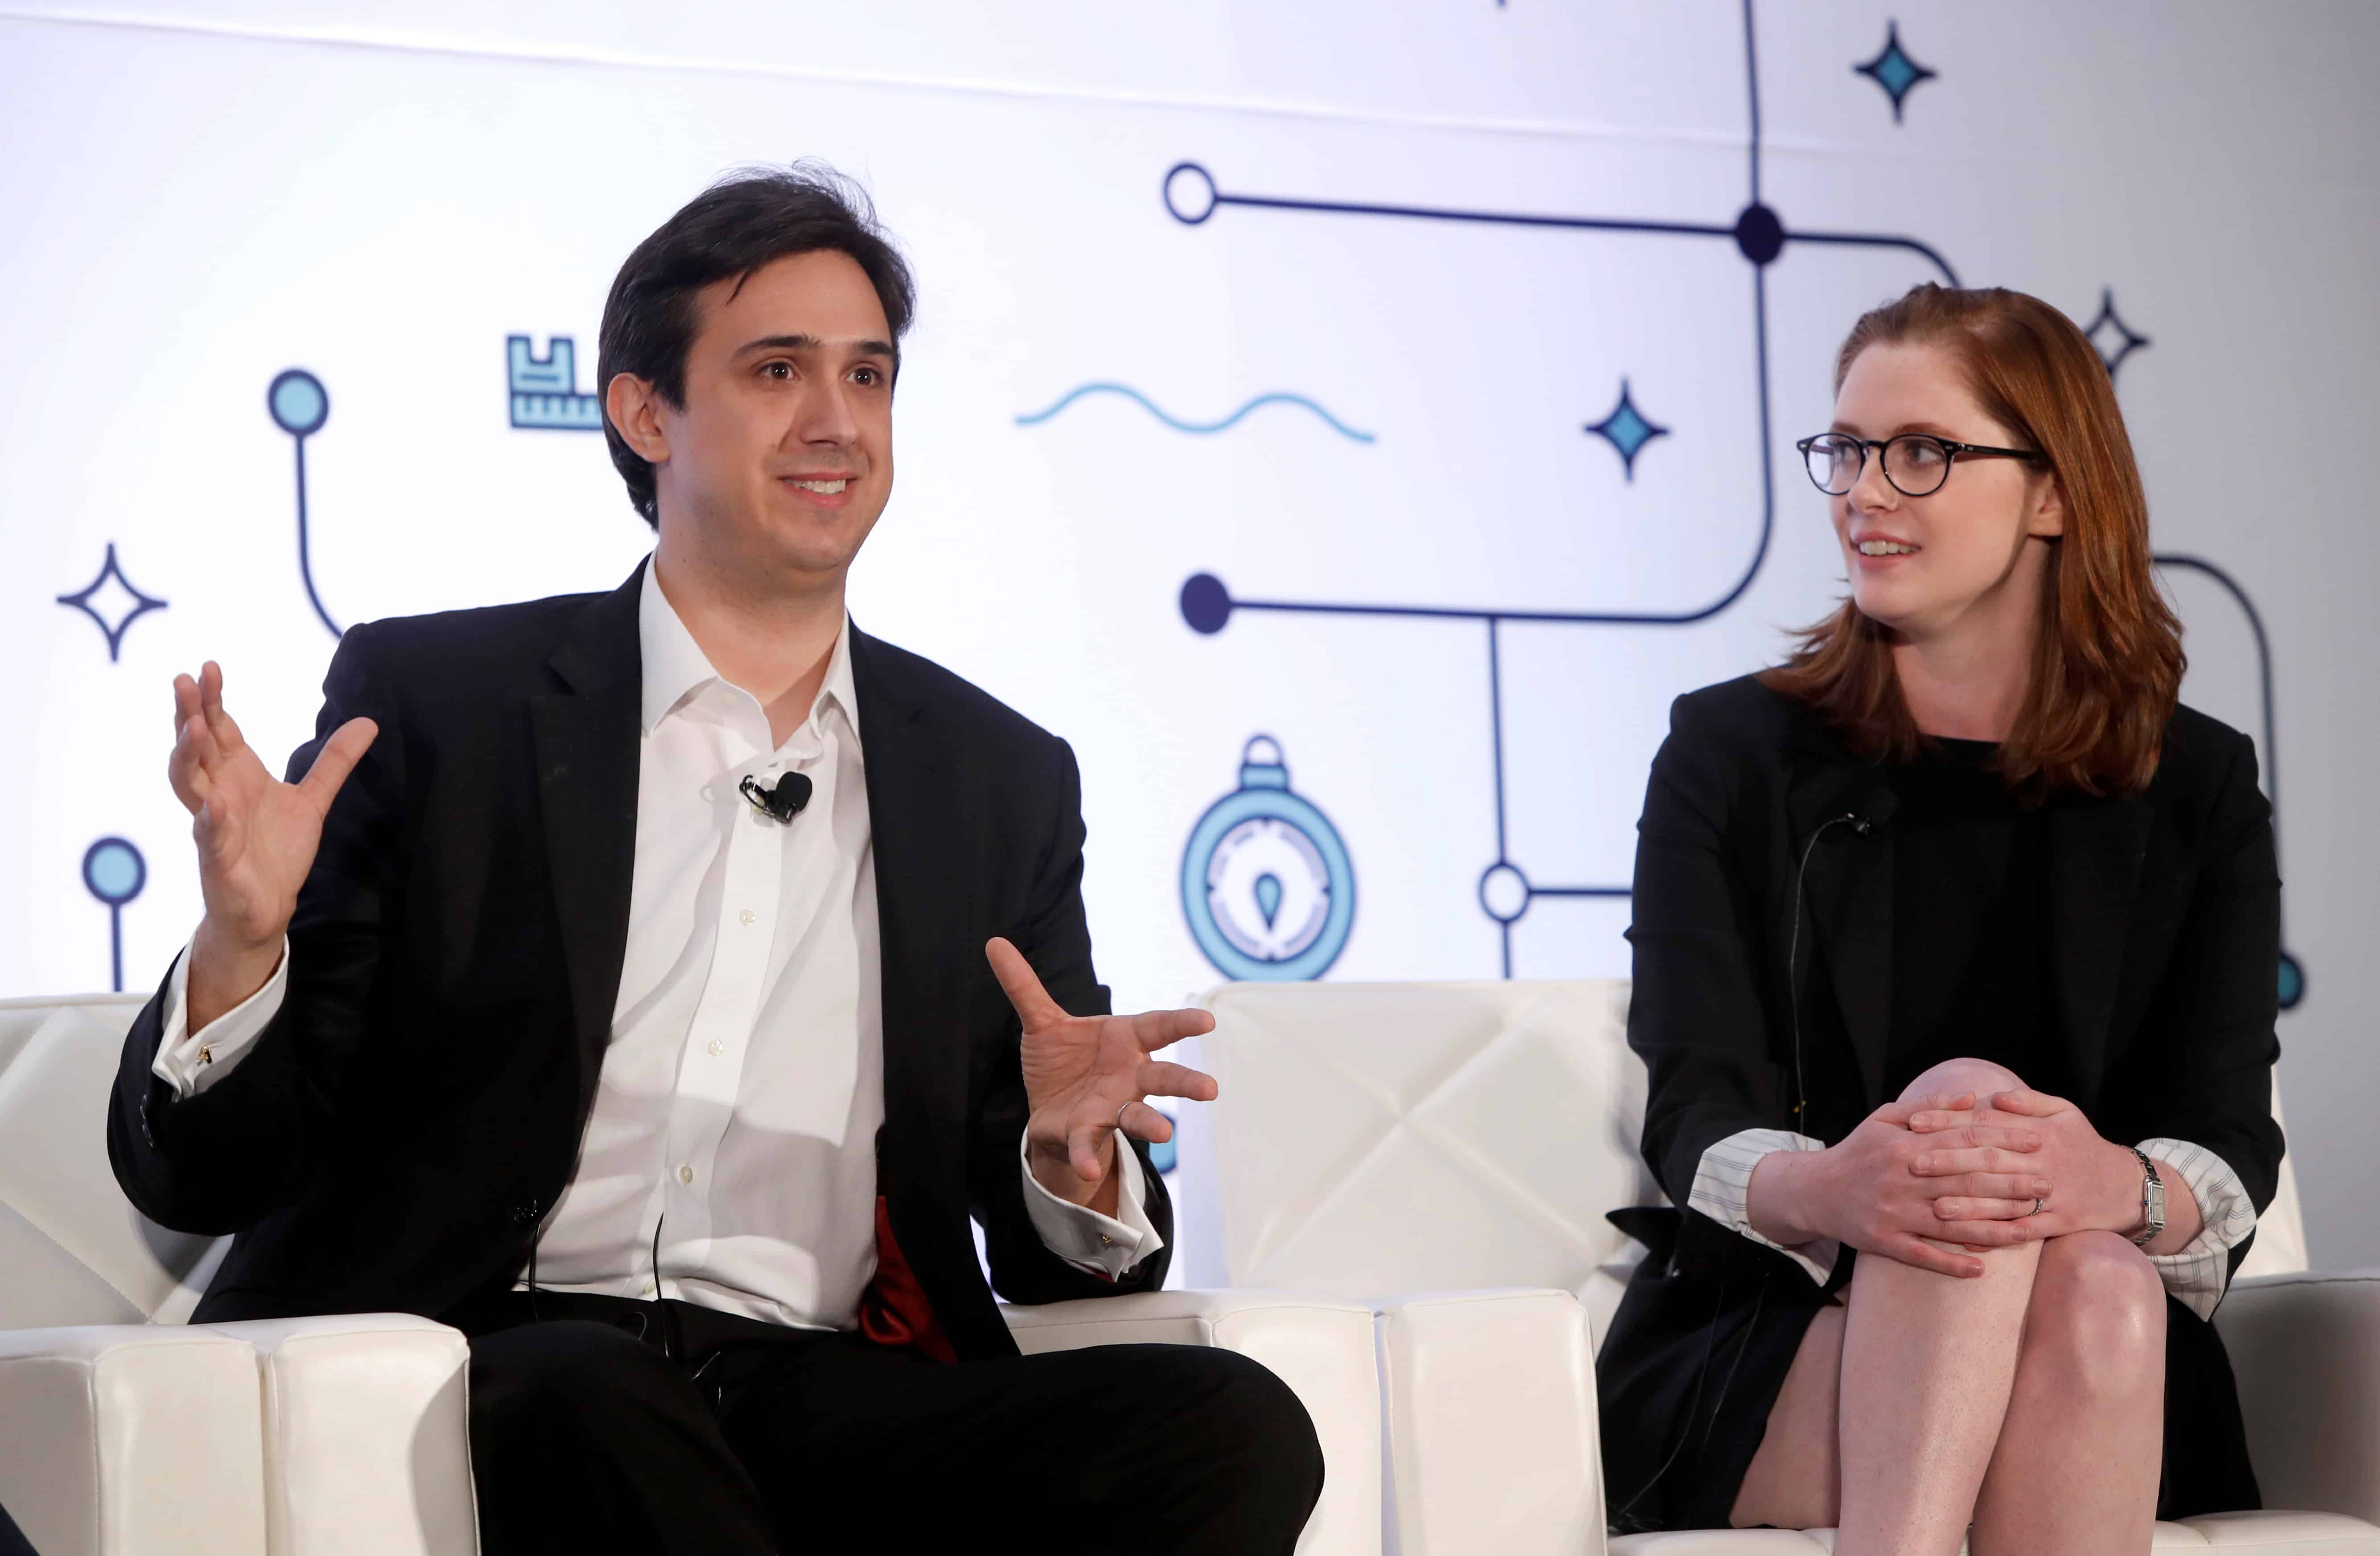 Trying to Stem Fallout of Spat, Tezos Foundation Replaces President ‎Gevers